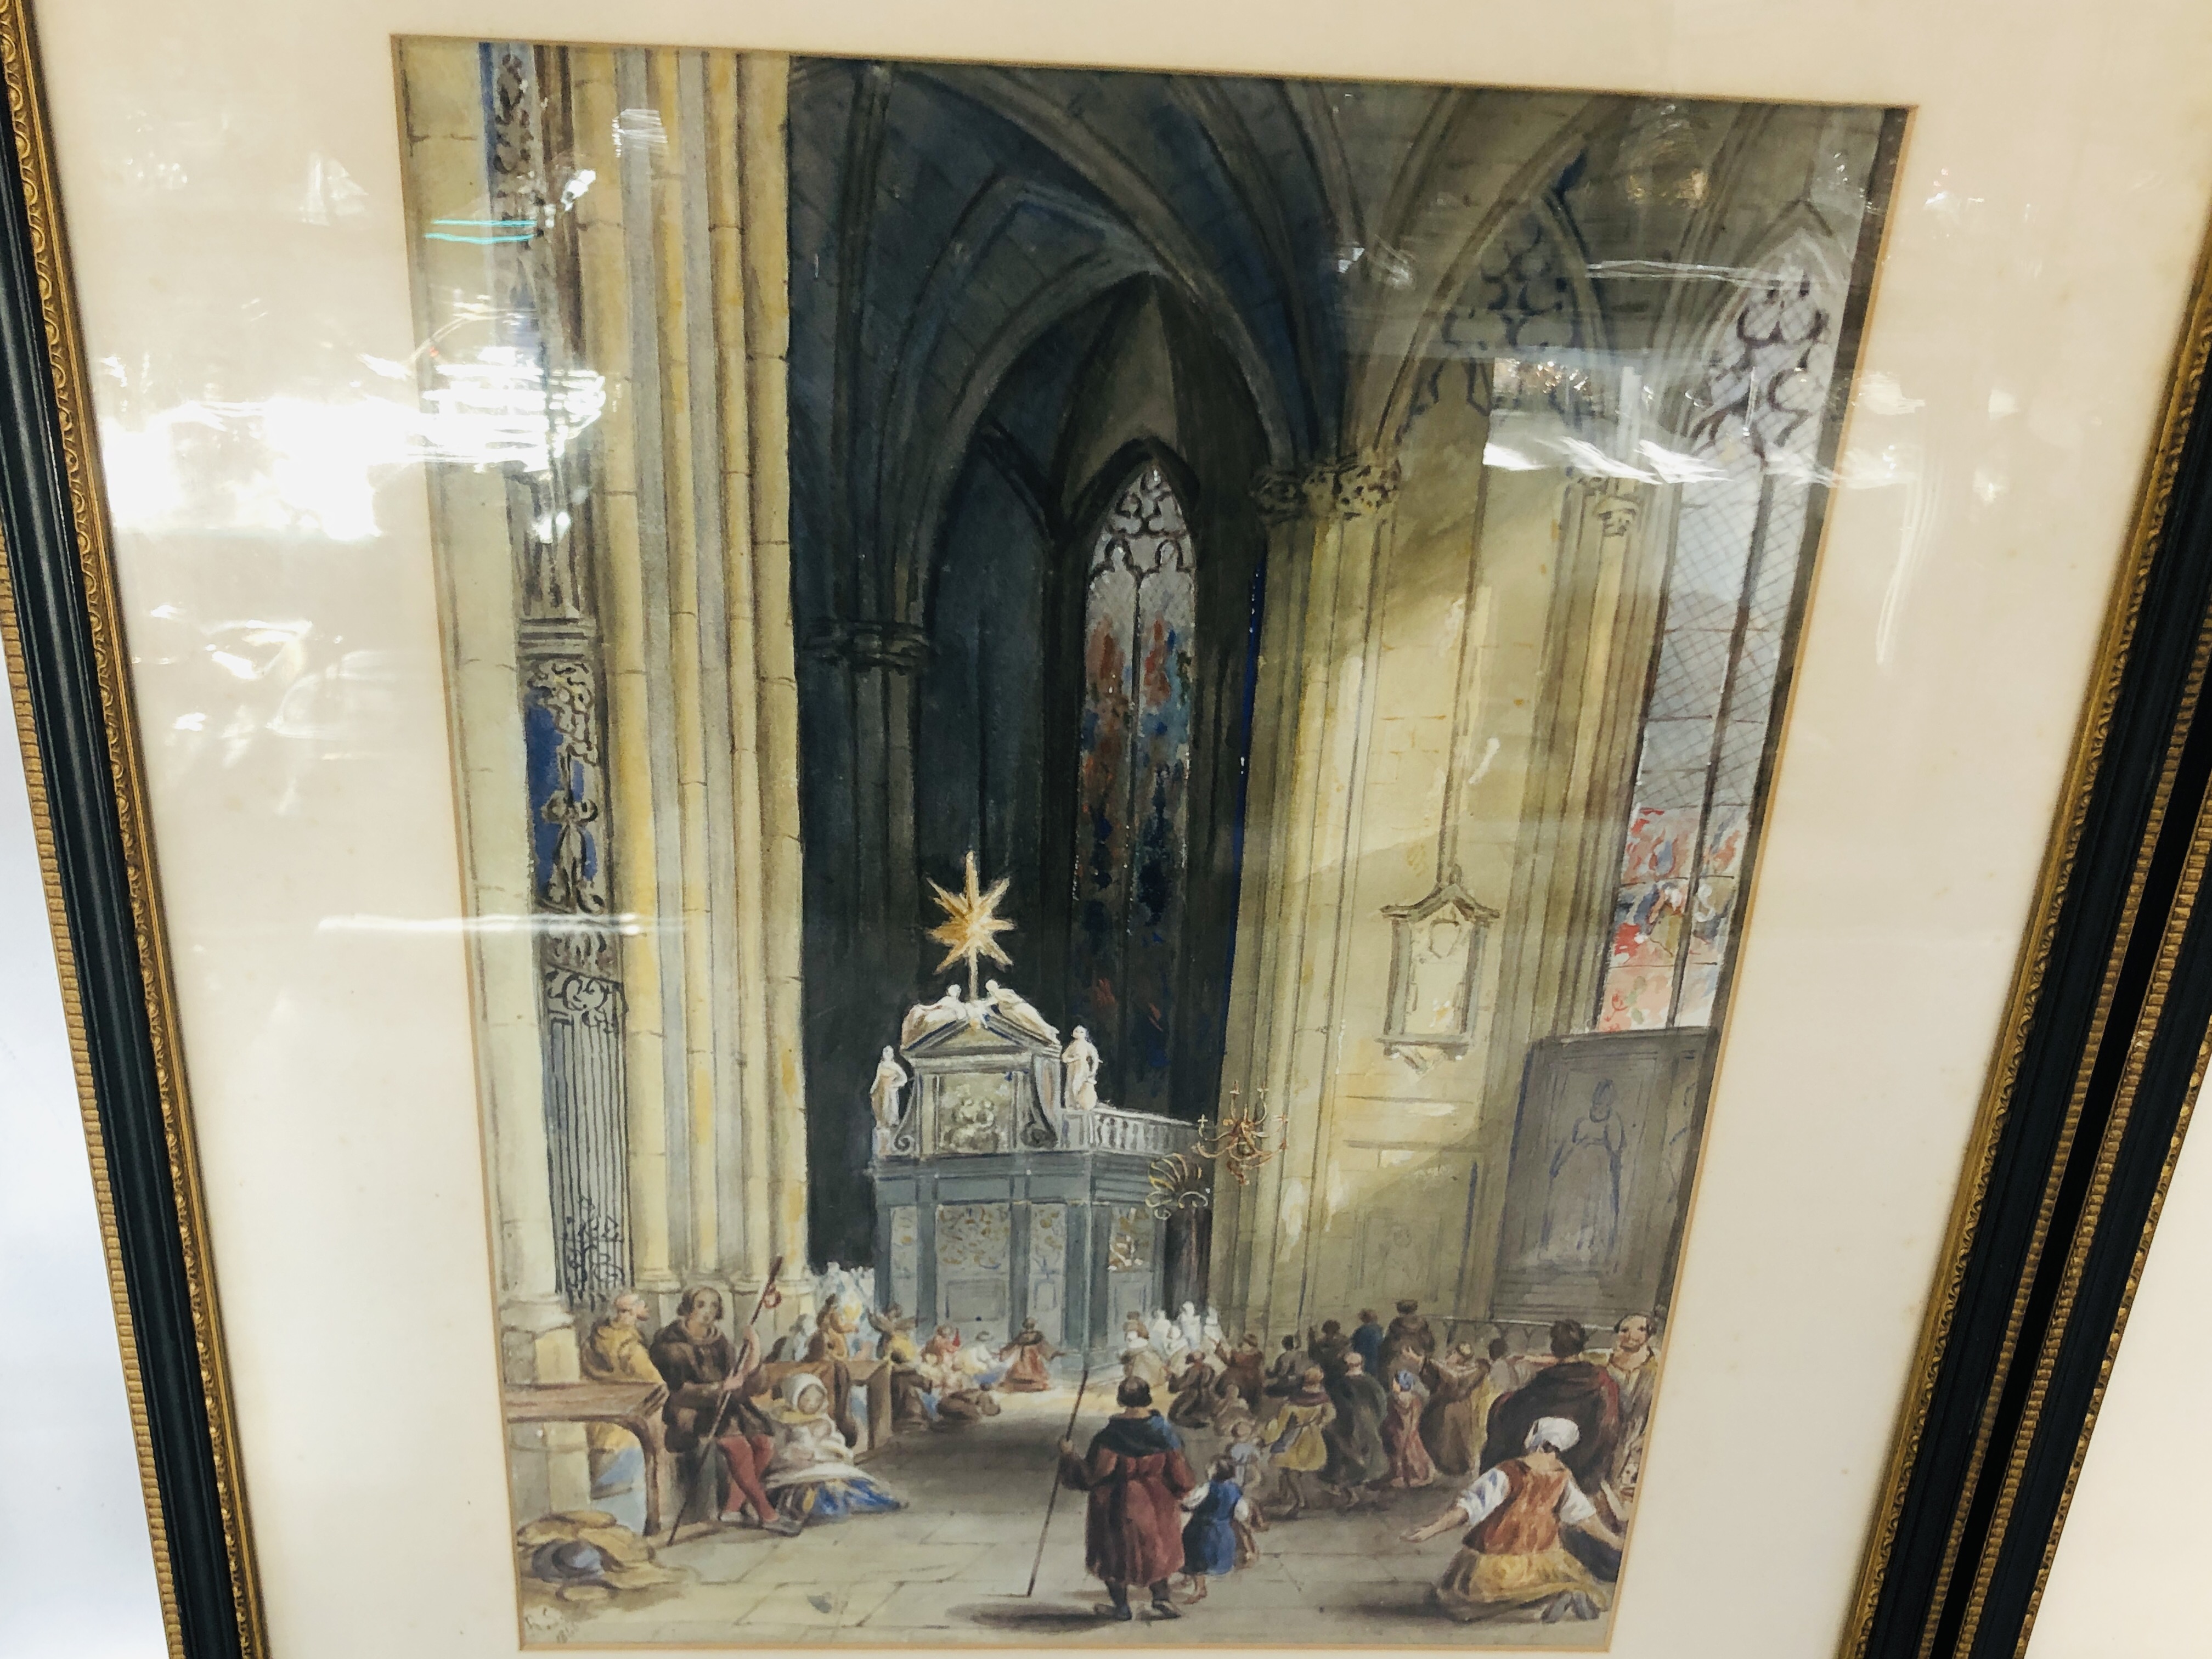 2 FRAMED WATERCOLOURS COLOGNE CATHEDRAL INTERIOR SCENE 45CM X 32CM AND STABLE SCENE 42CM X 32CM - Image 4 of 11